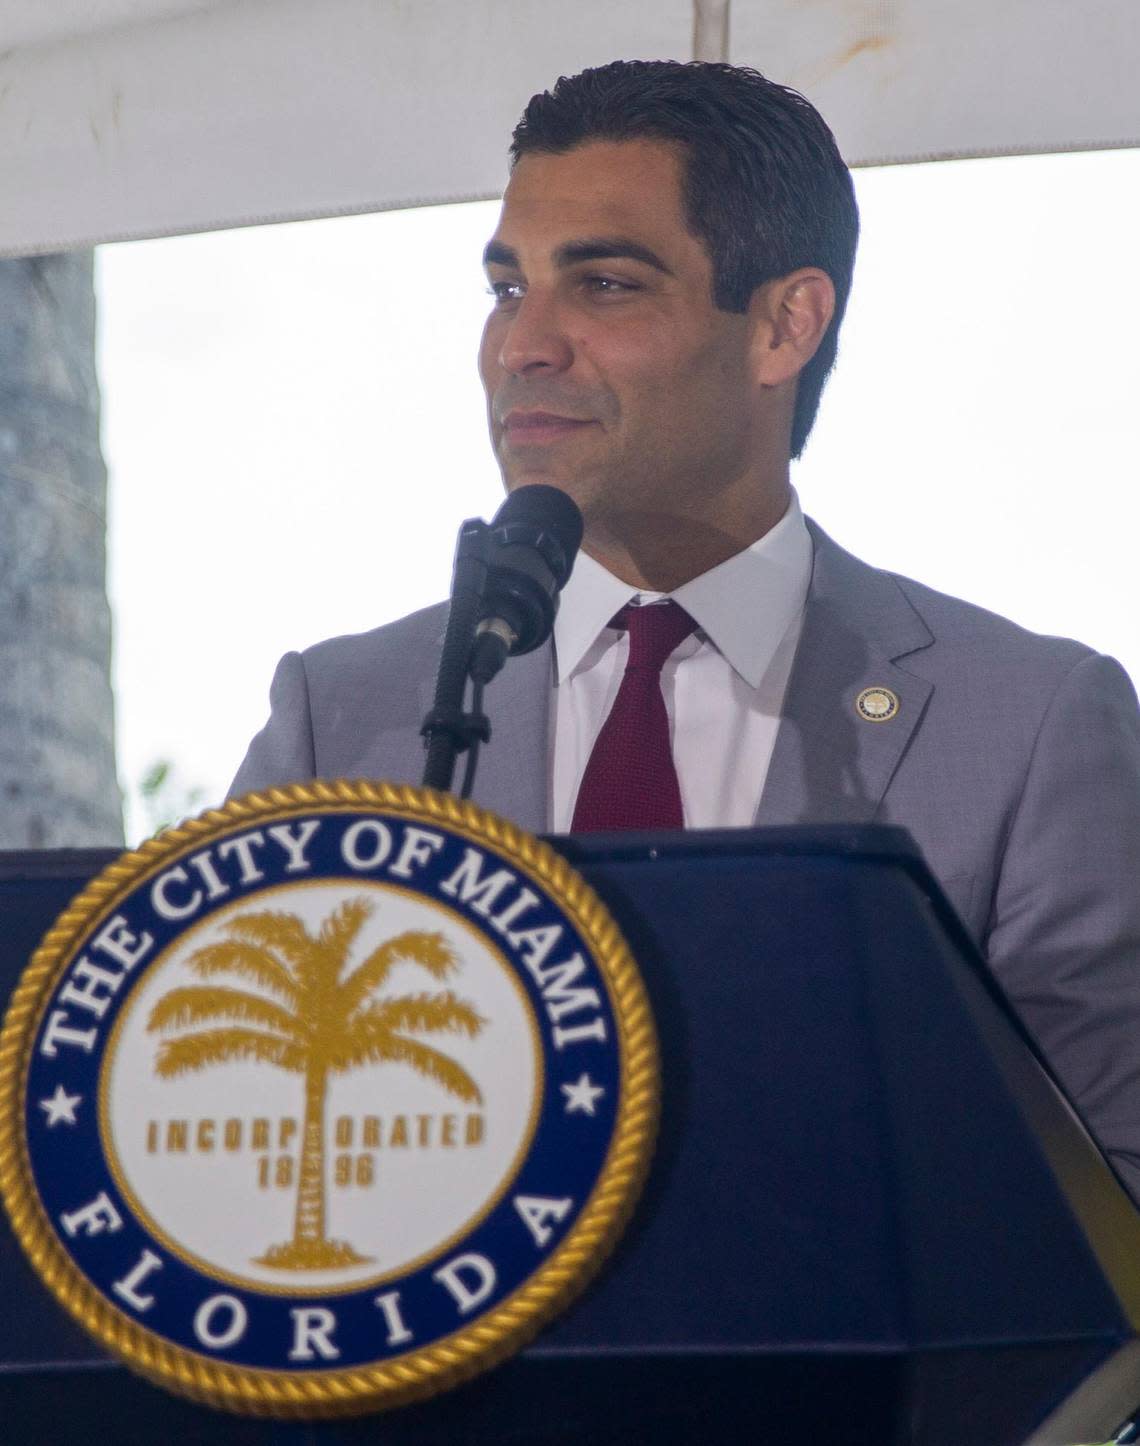 In 2019, Miami Mayor Francis Suarez said the city will help pay for operational costs for the first 10 years of a new civil rights museum at Historic Virginia Key Beach Park.